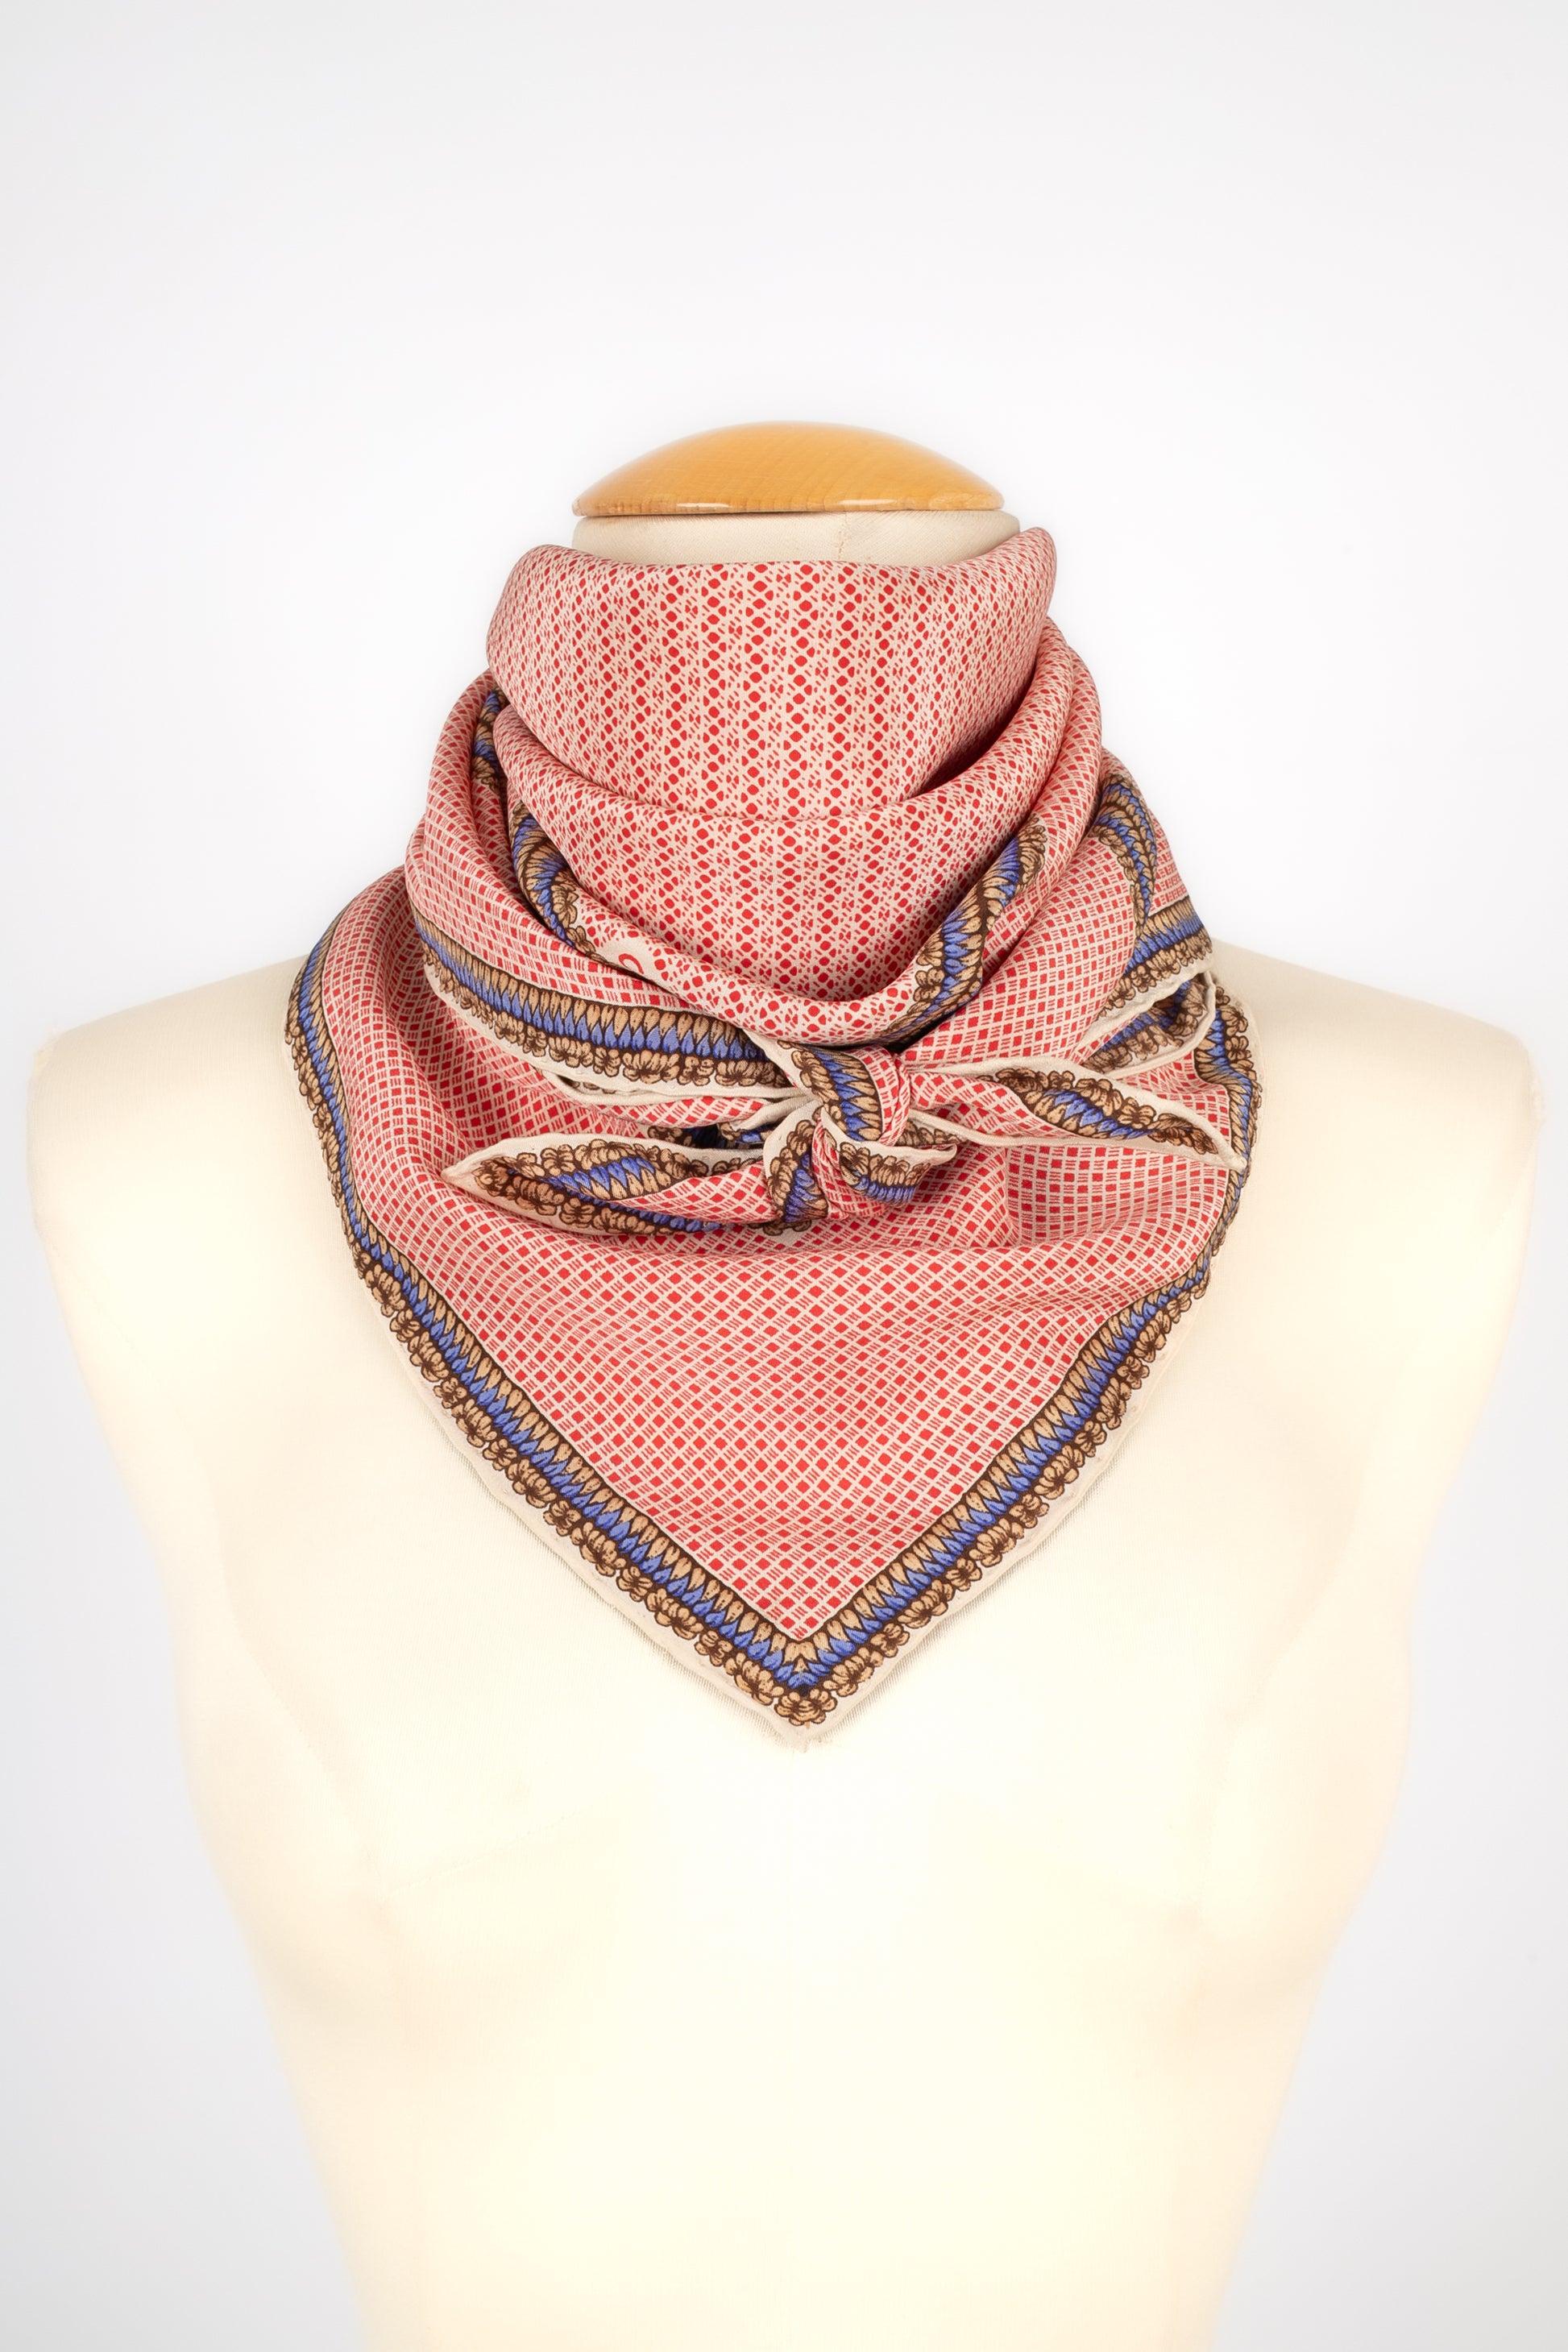 Women's Chanel Silk Foulard in Red, Beige and Blue Tones For Sale